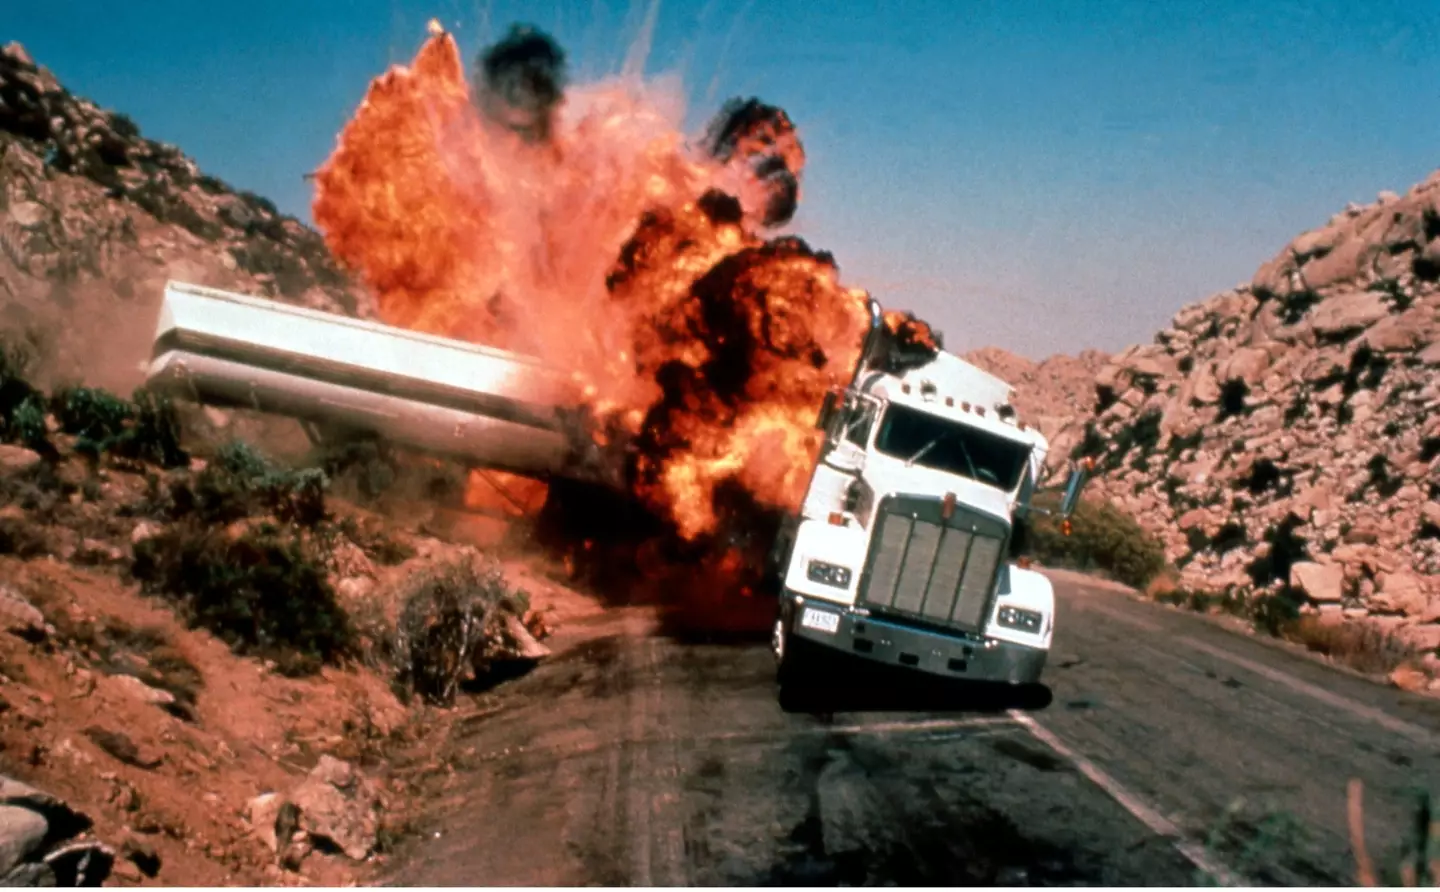 The truck chase was a memorable scene from Licence to Kill, and also possibly haunted.